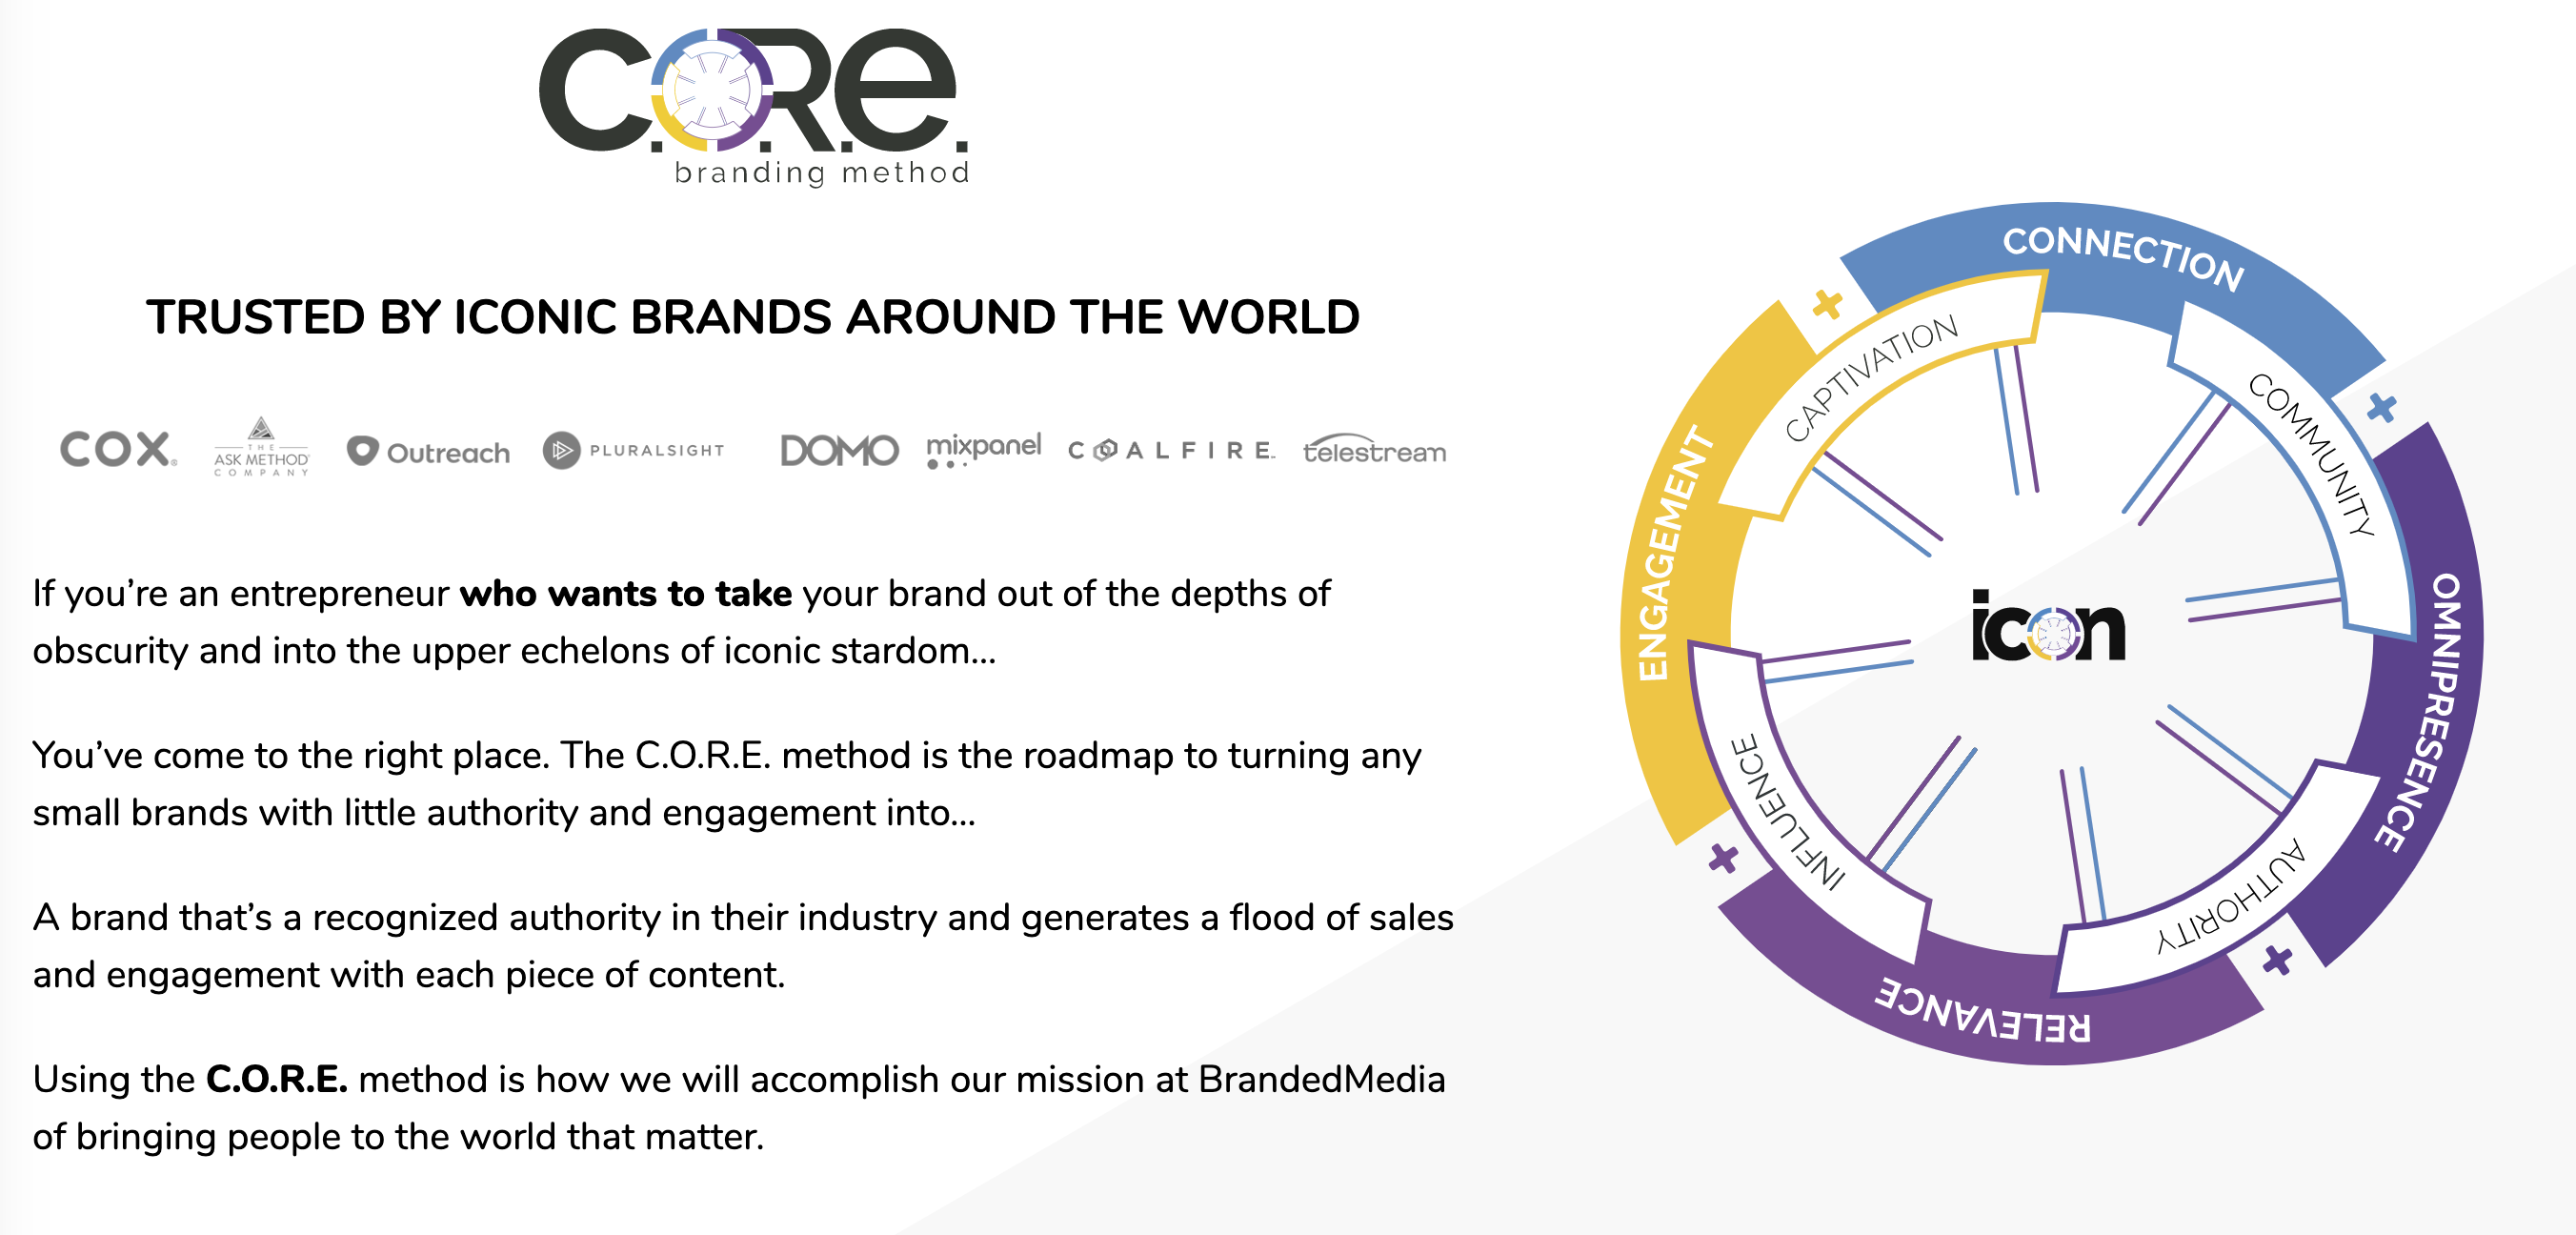 Influencive: Why You Need to Implement the C.O.R.E Branding Method